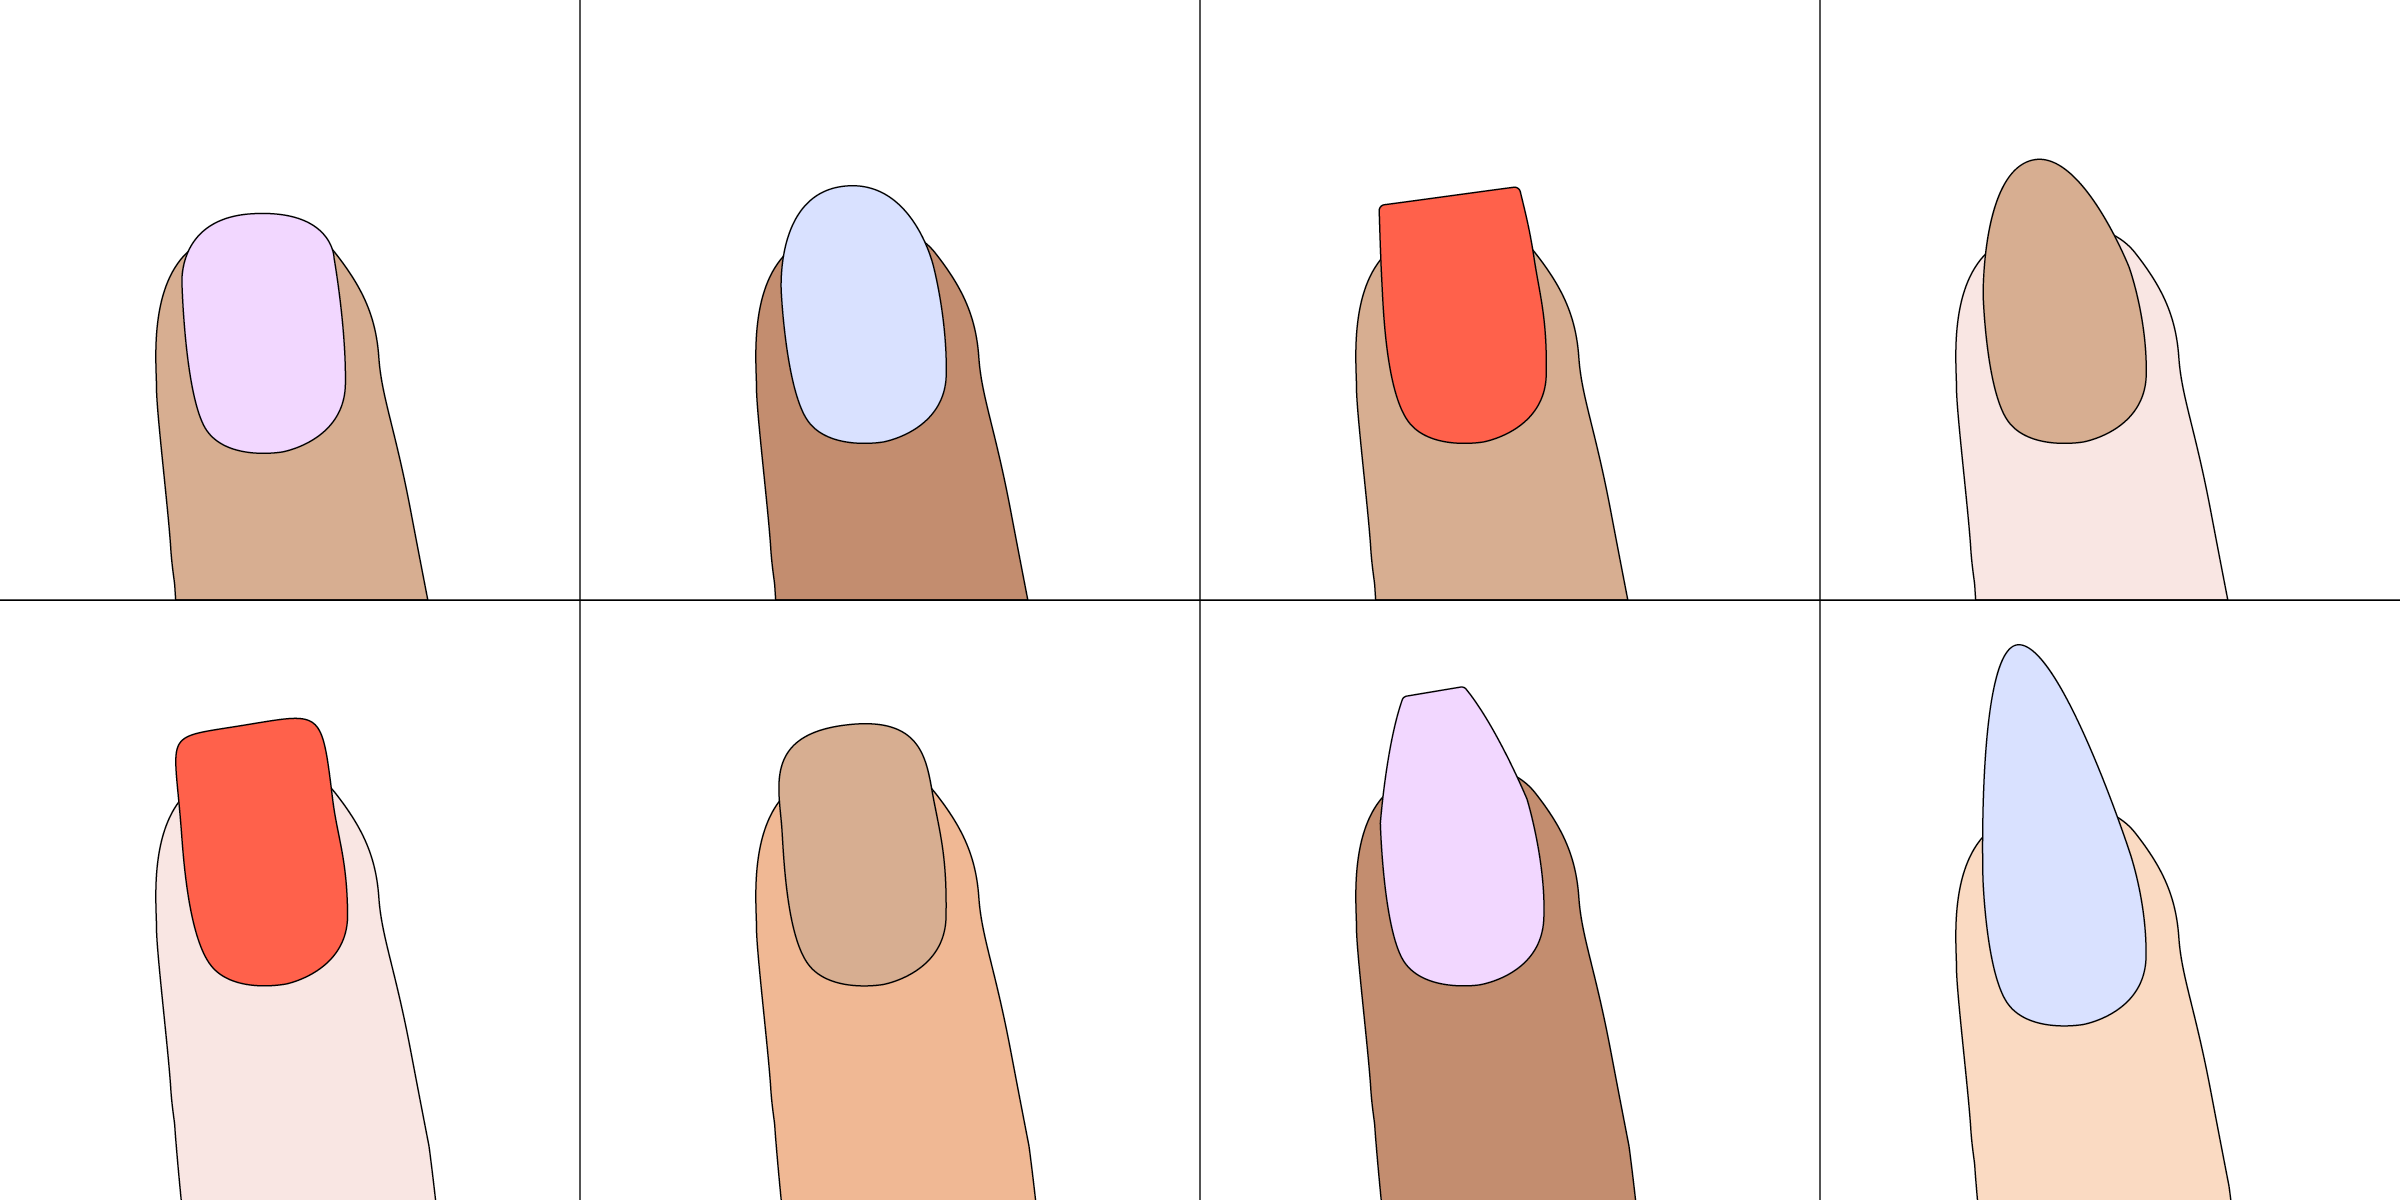 Nail Shapes for 2021 - 8 Styles Explained